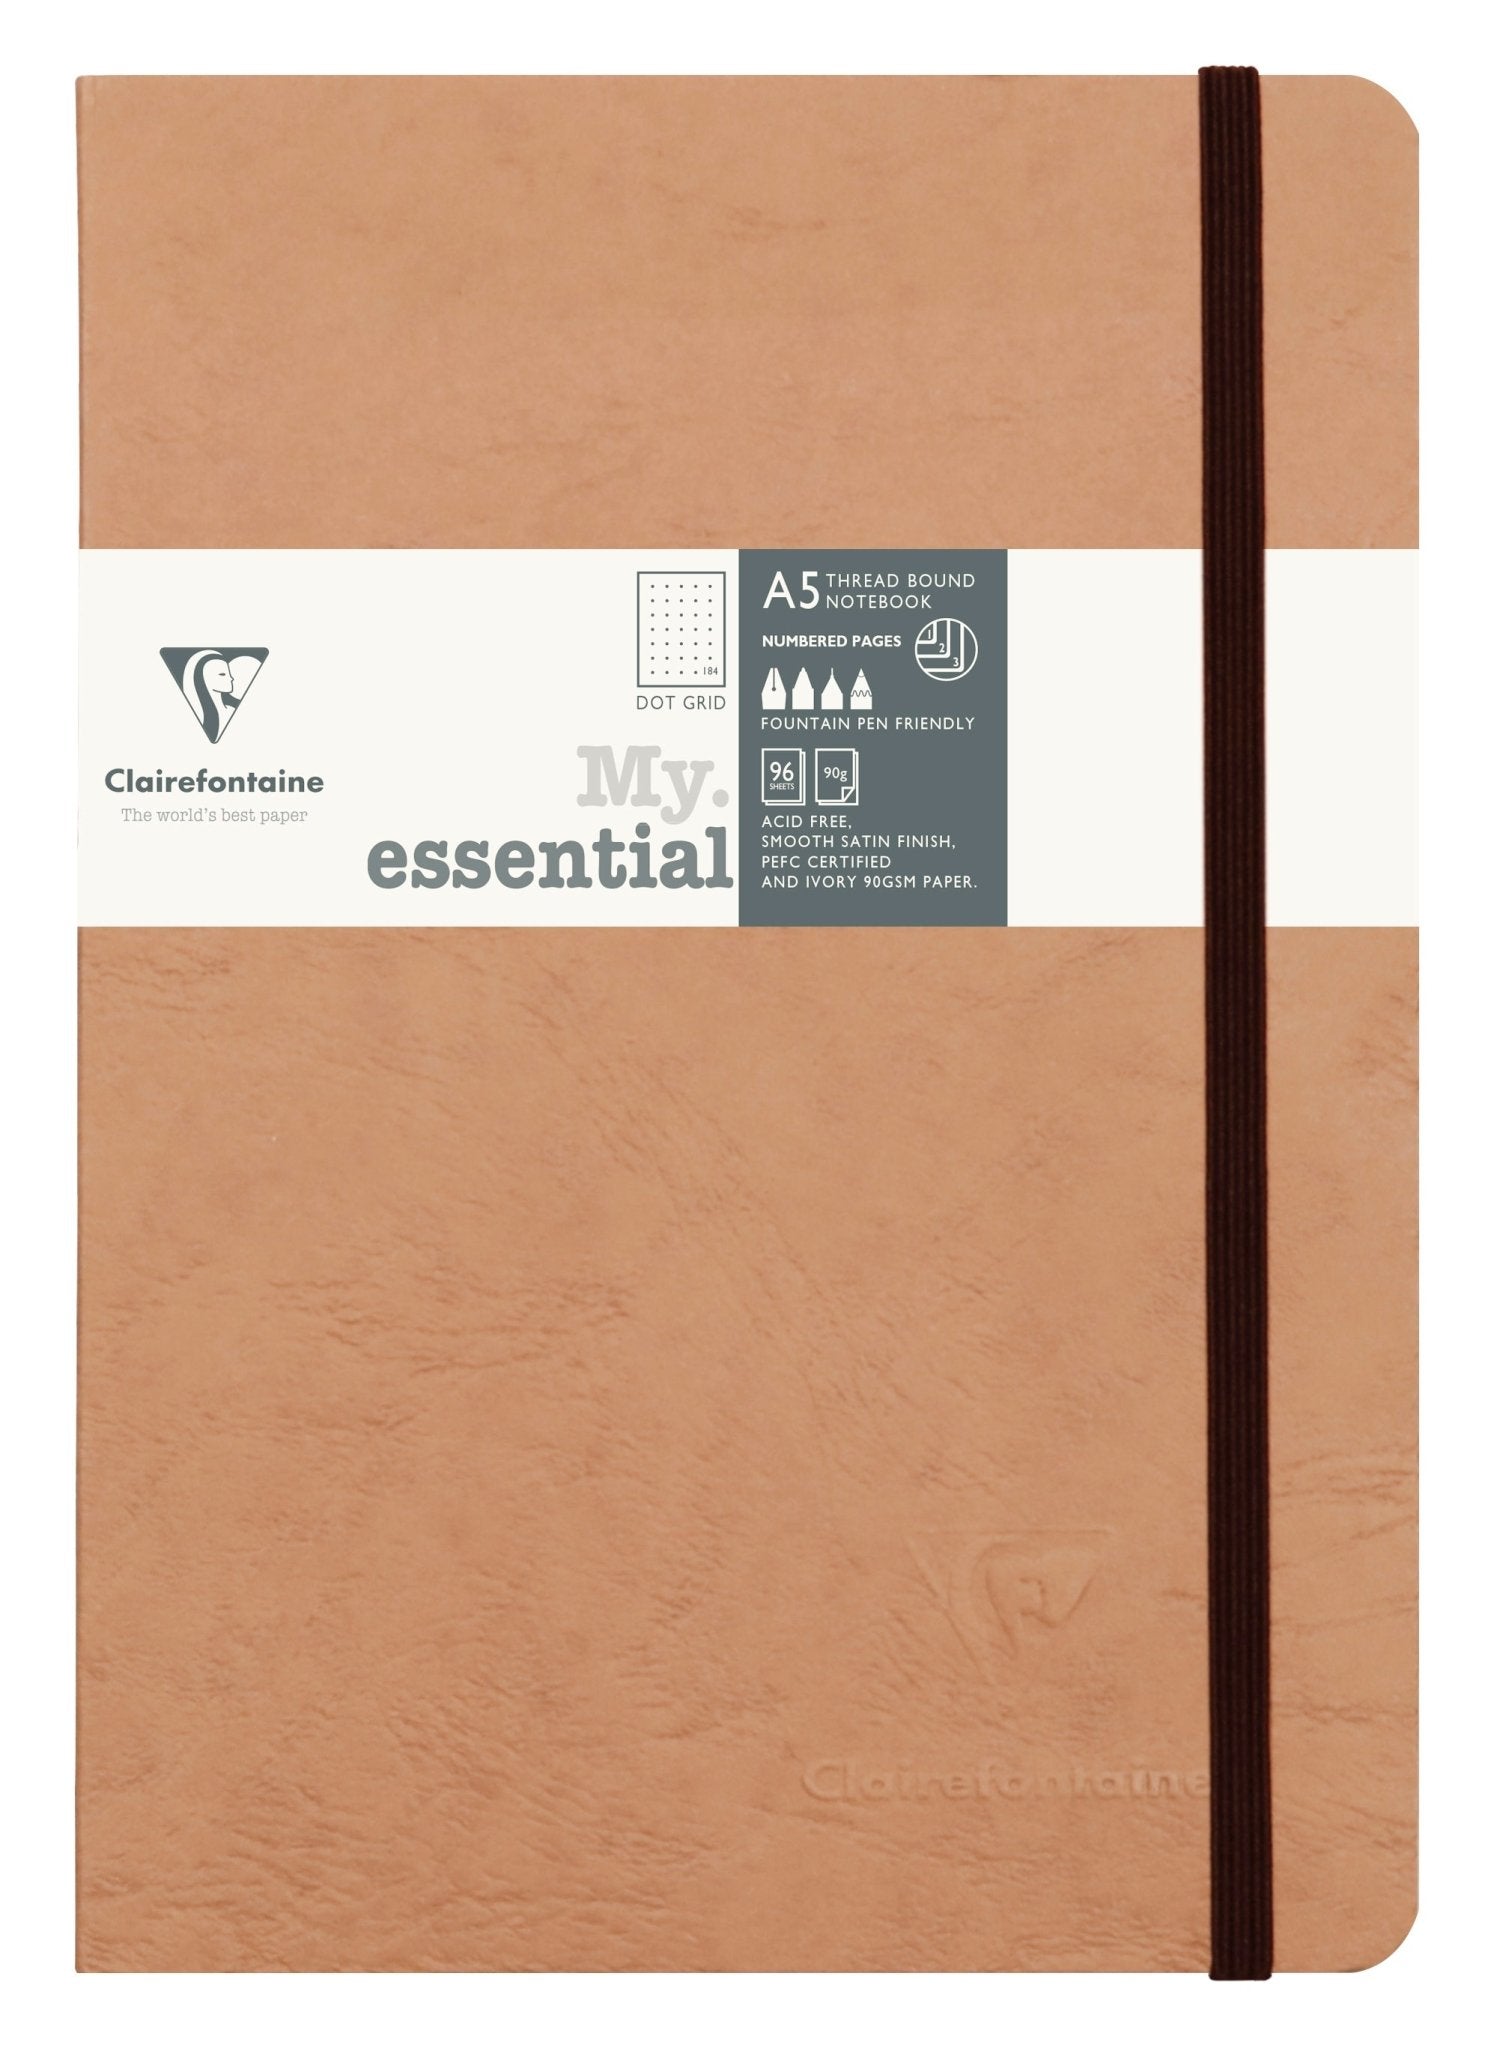 Carnet Clairefontaine Age Bag My.essential A5 cousu - Gilbertine BrusselsClairefontainecarnet